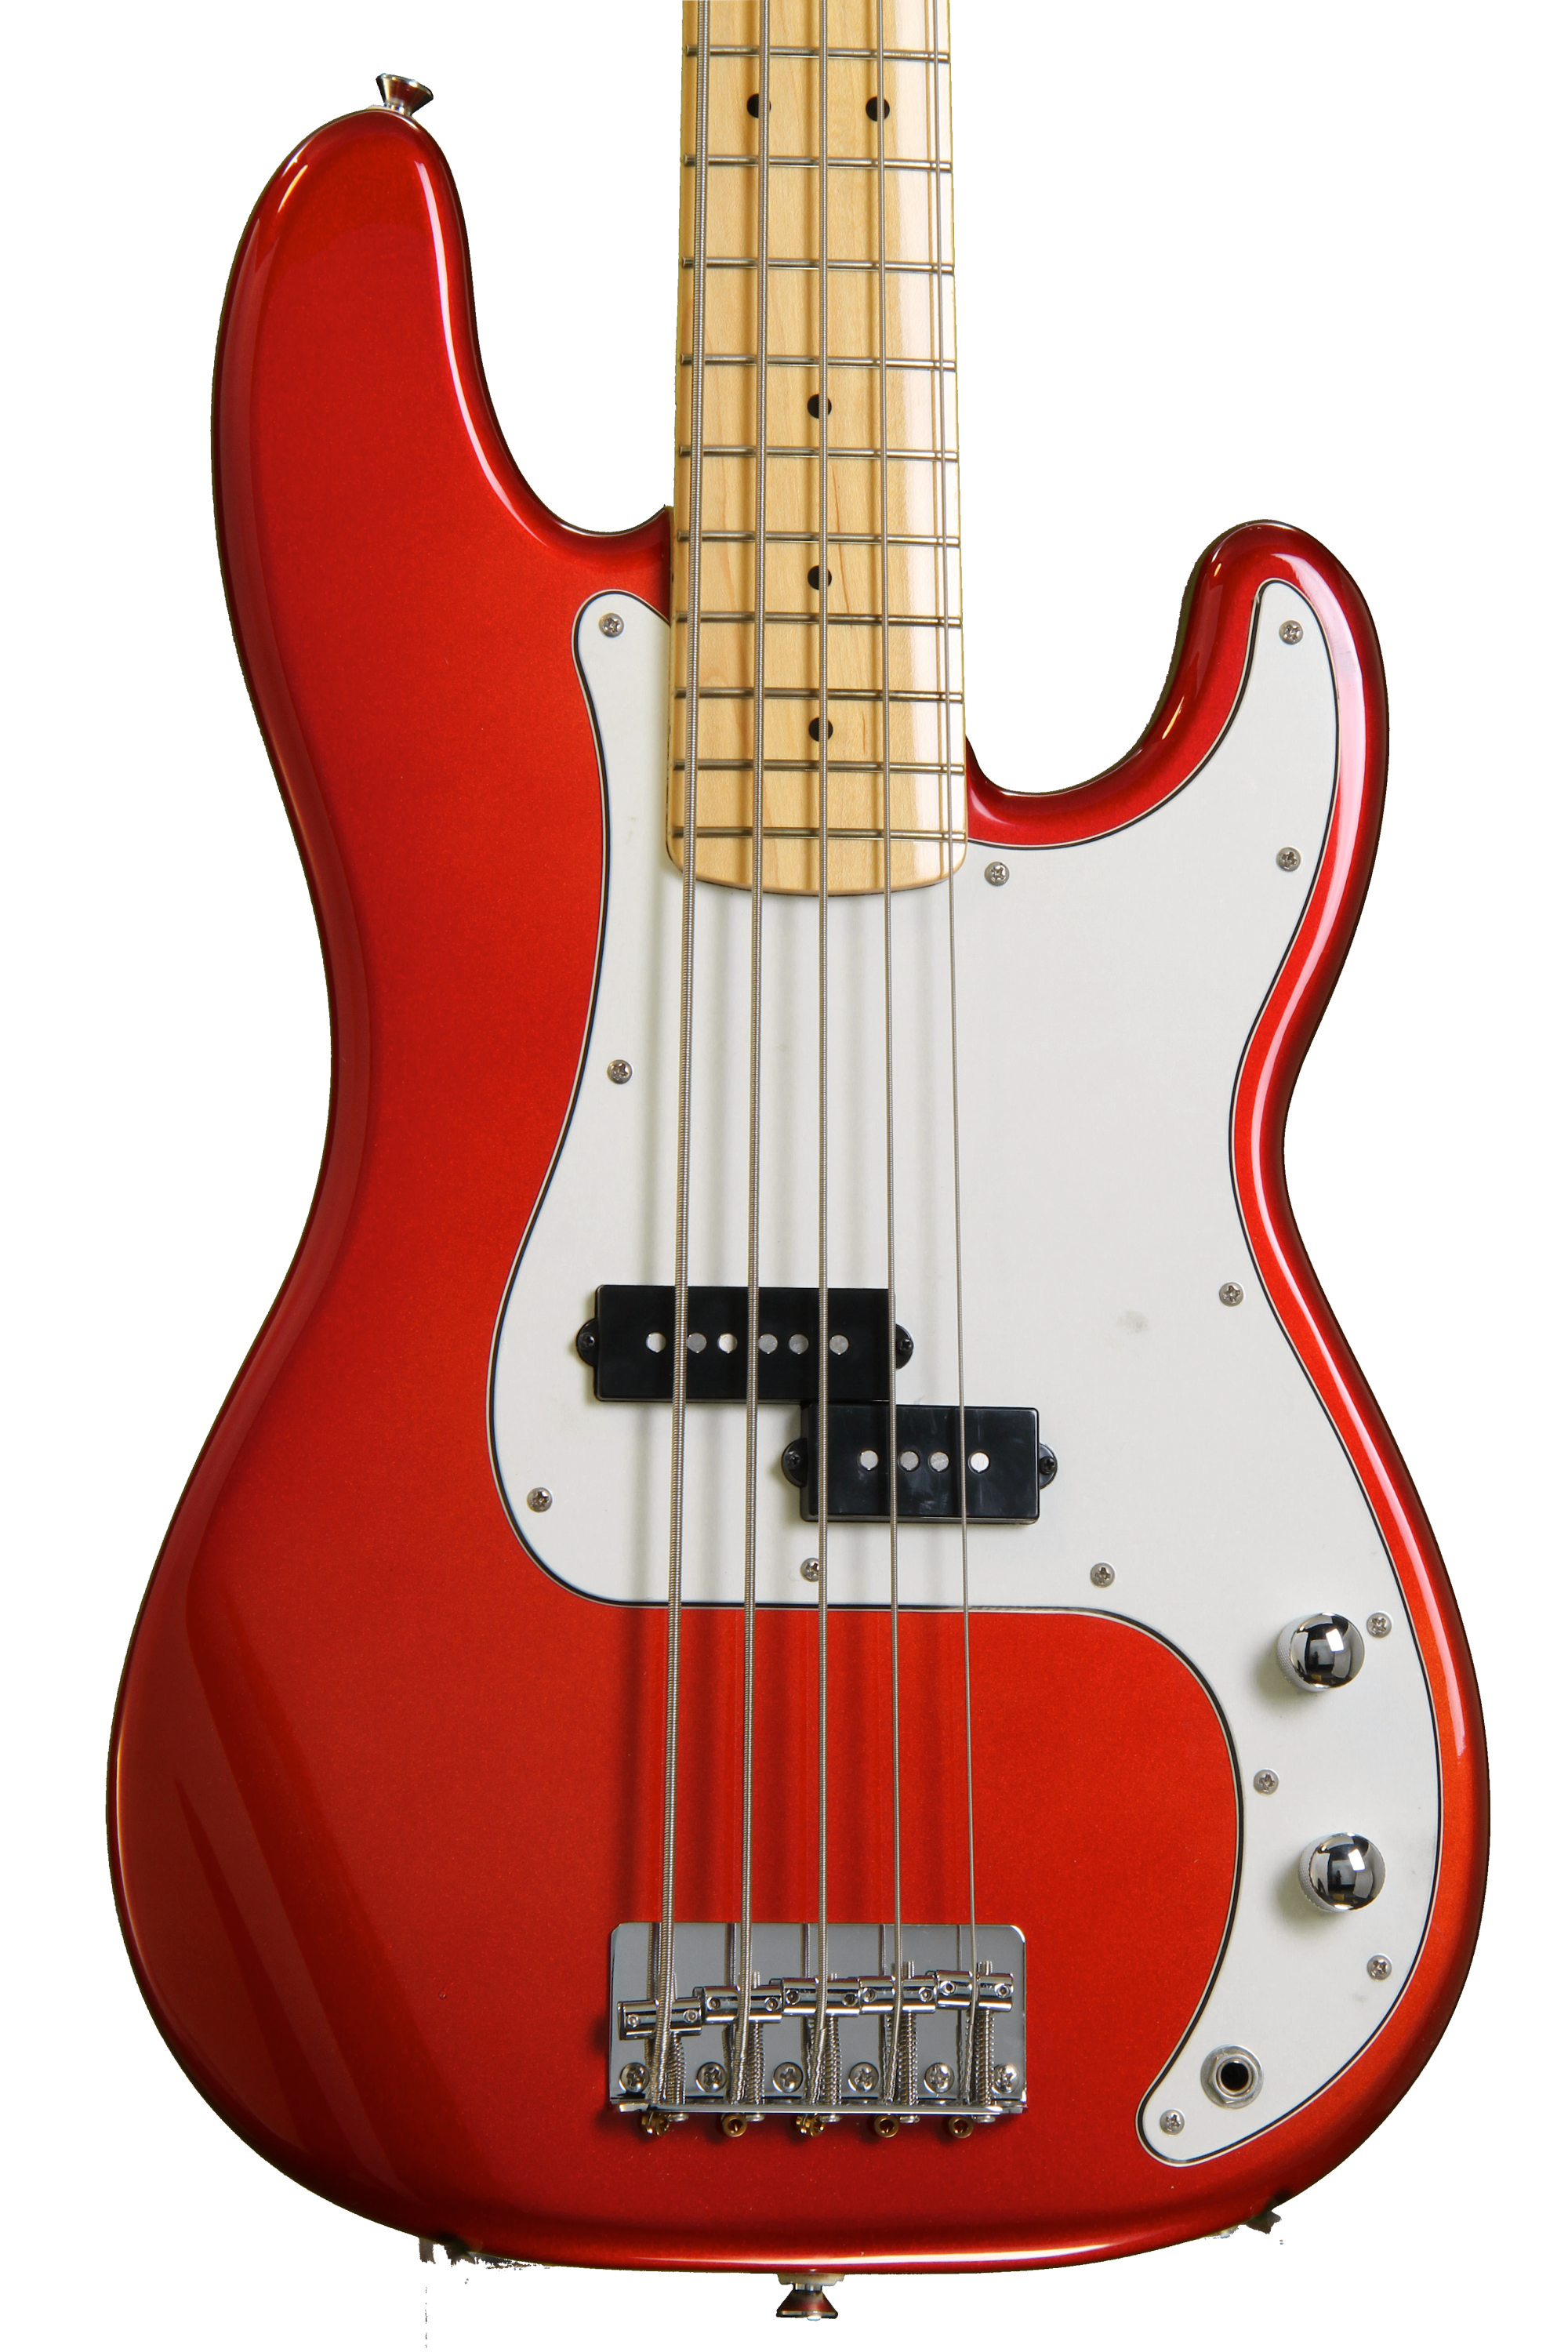 Squier Vintage Modified P Bass V - Candy Apple Red | Sweetwater